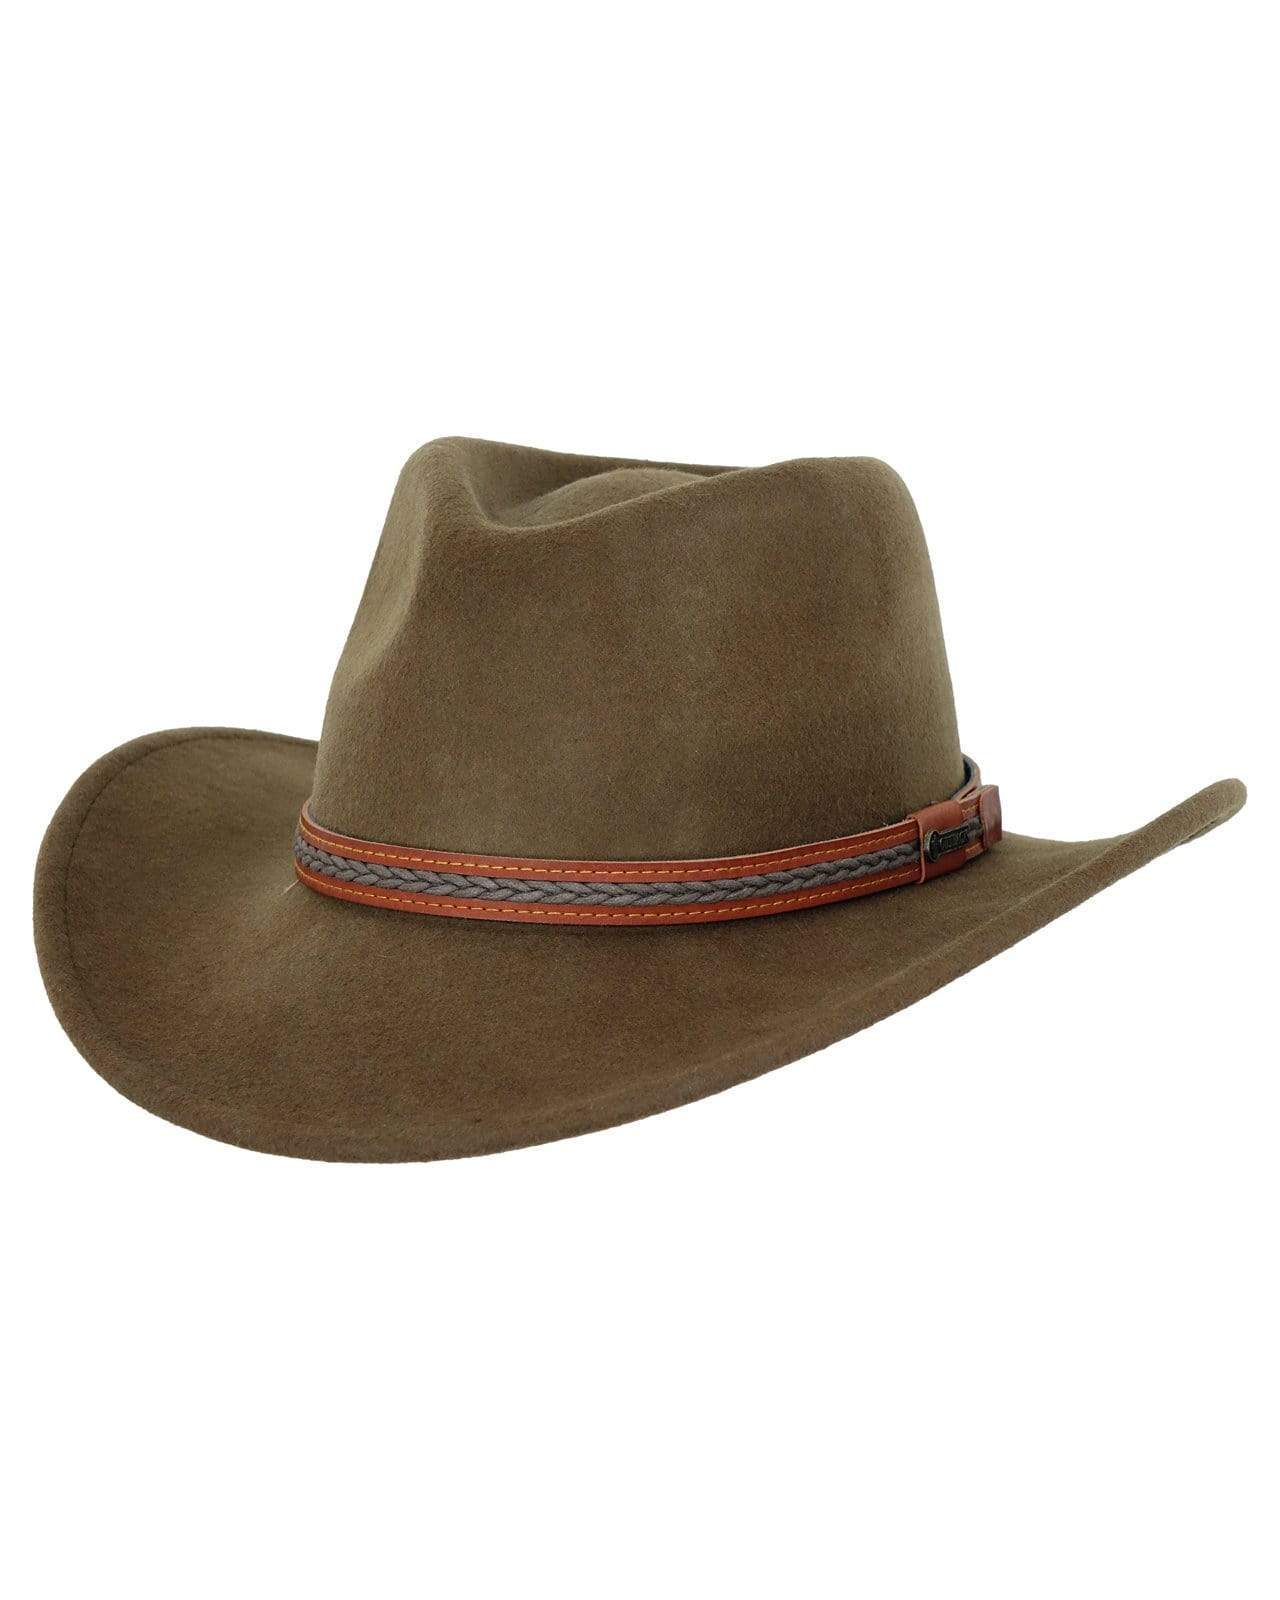 High Country Wool Felt Hats by Outback Trading Company 